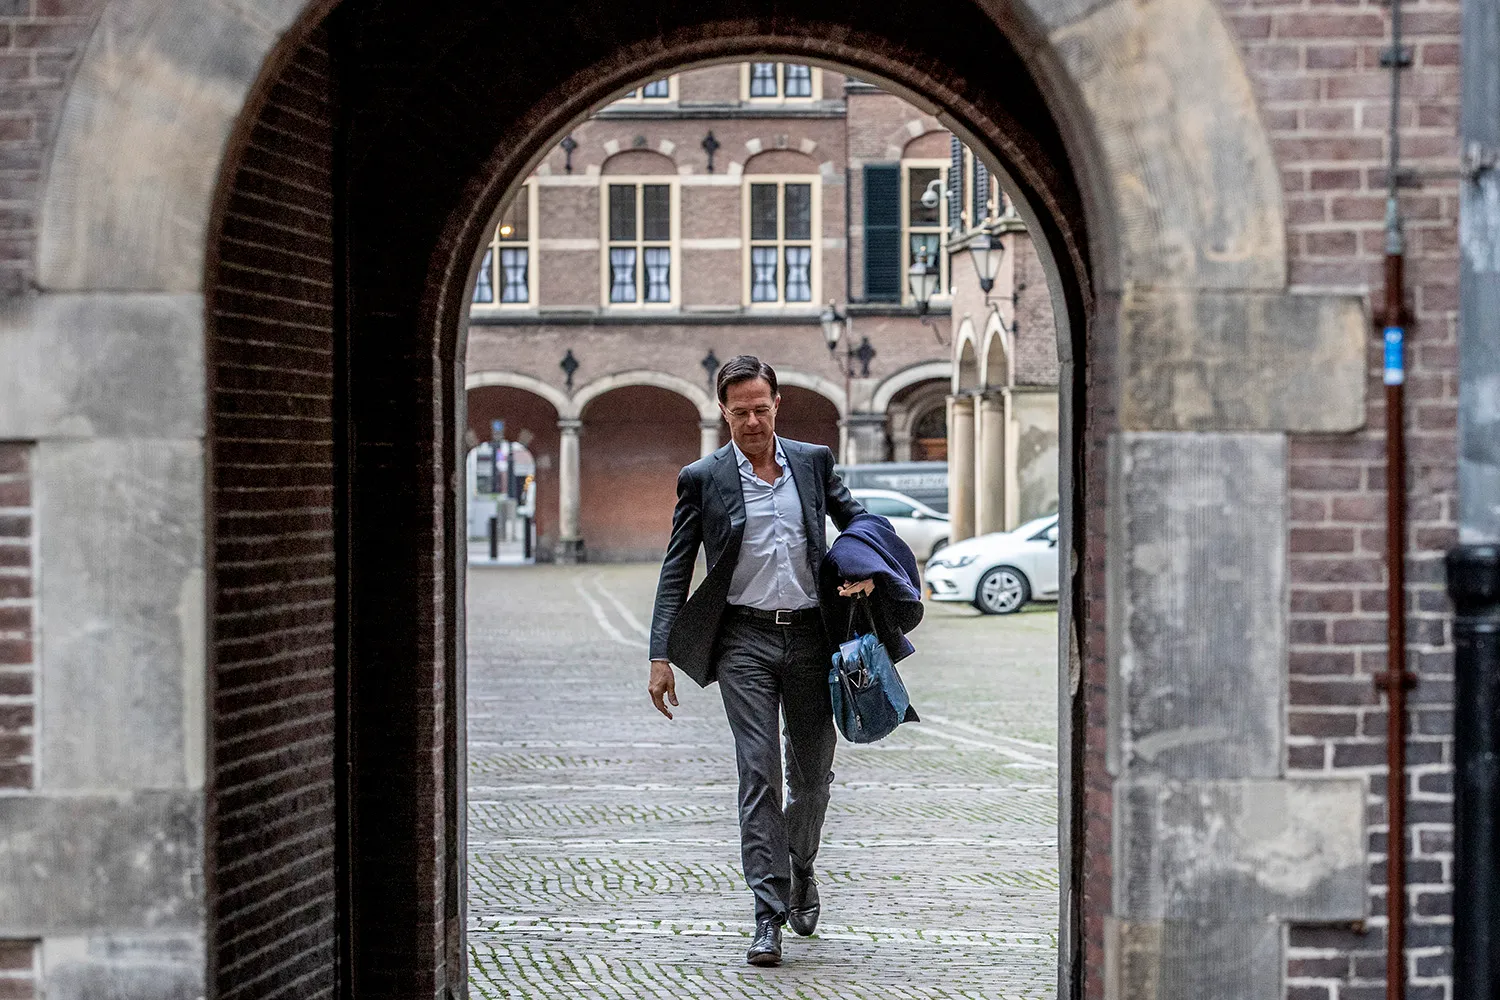 Rutte, wearing an open suit jacket, button-up shirt, and no tie, carries a bag in one hand as he walks through an arched stone entrance. The cobblestone courtyard that Rutte just crossed is visible through the doorway.